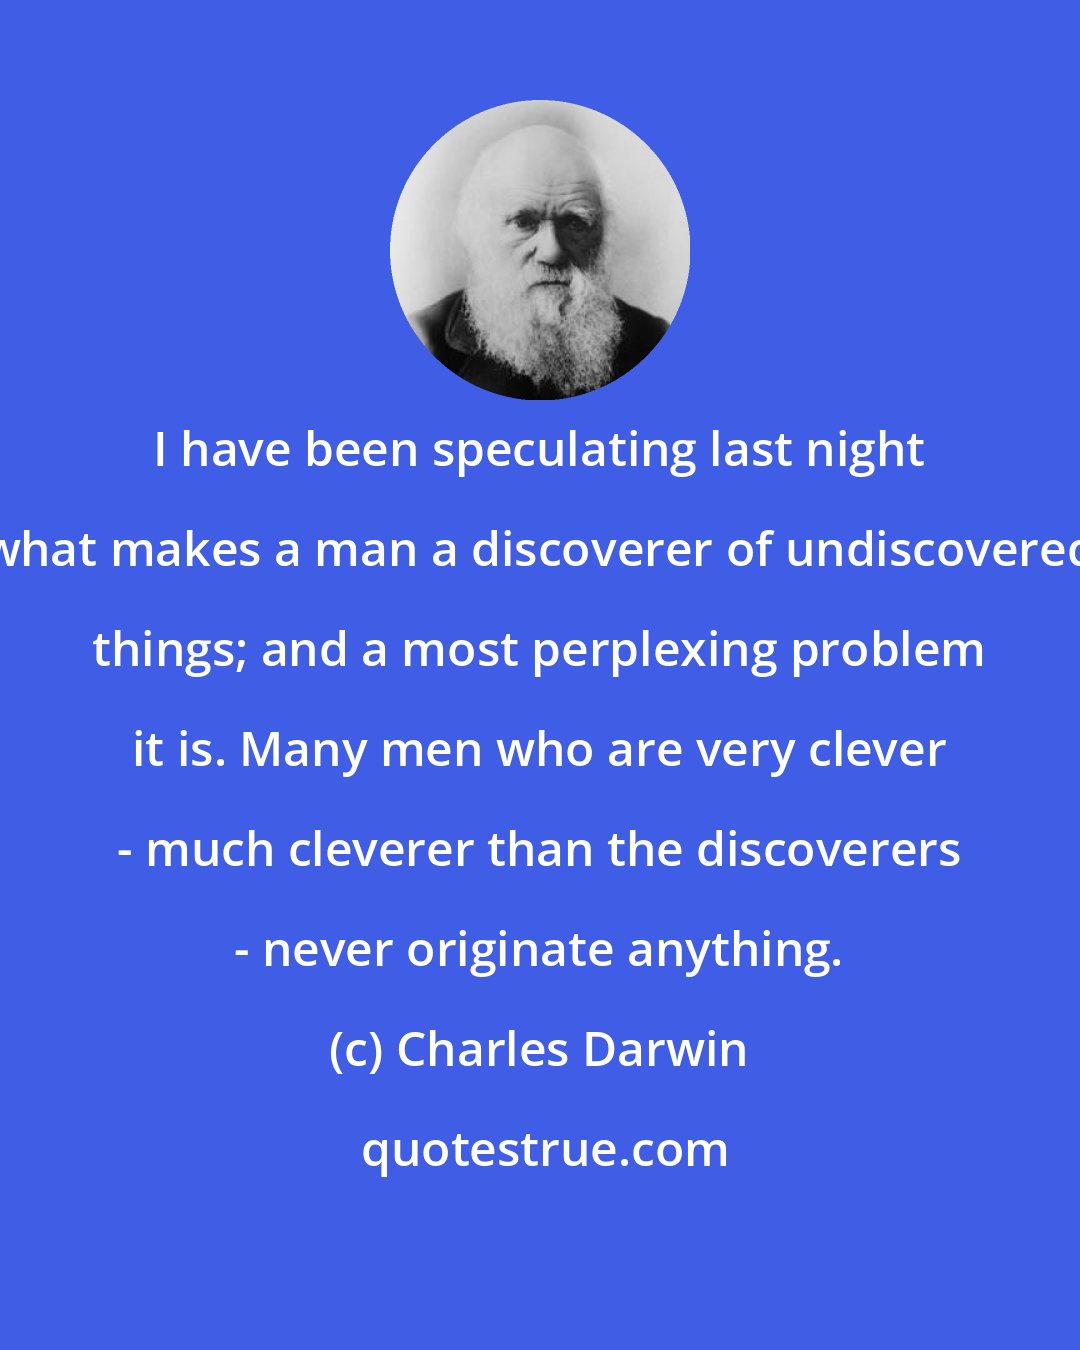 Charles Darwin: I have been speculating last night what makes a man a discoverer of undiscovered things; and a most perplexing problem it is. Many men who are very clever - much cleverer than the discoverers - never originate anything.